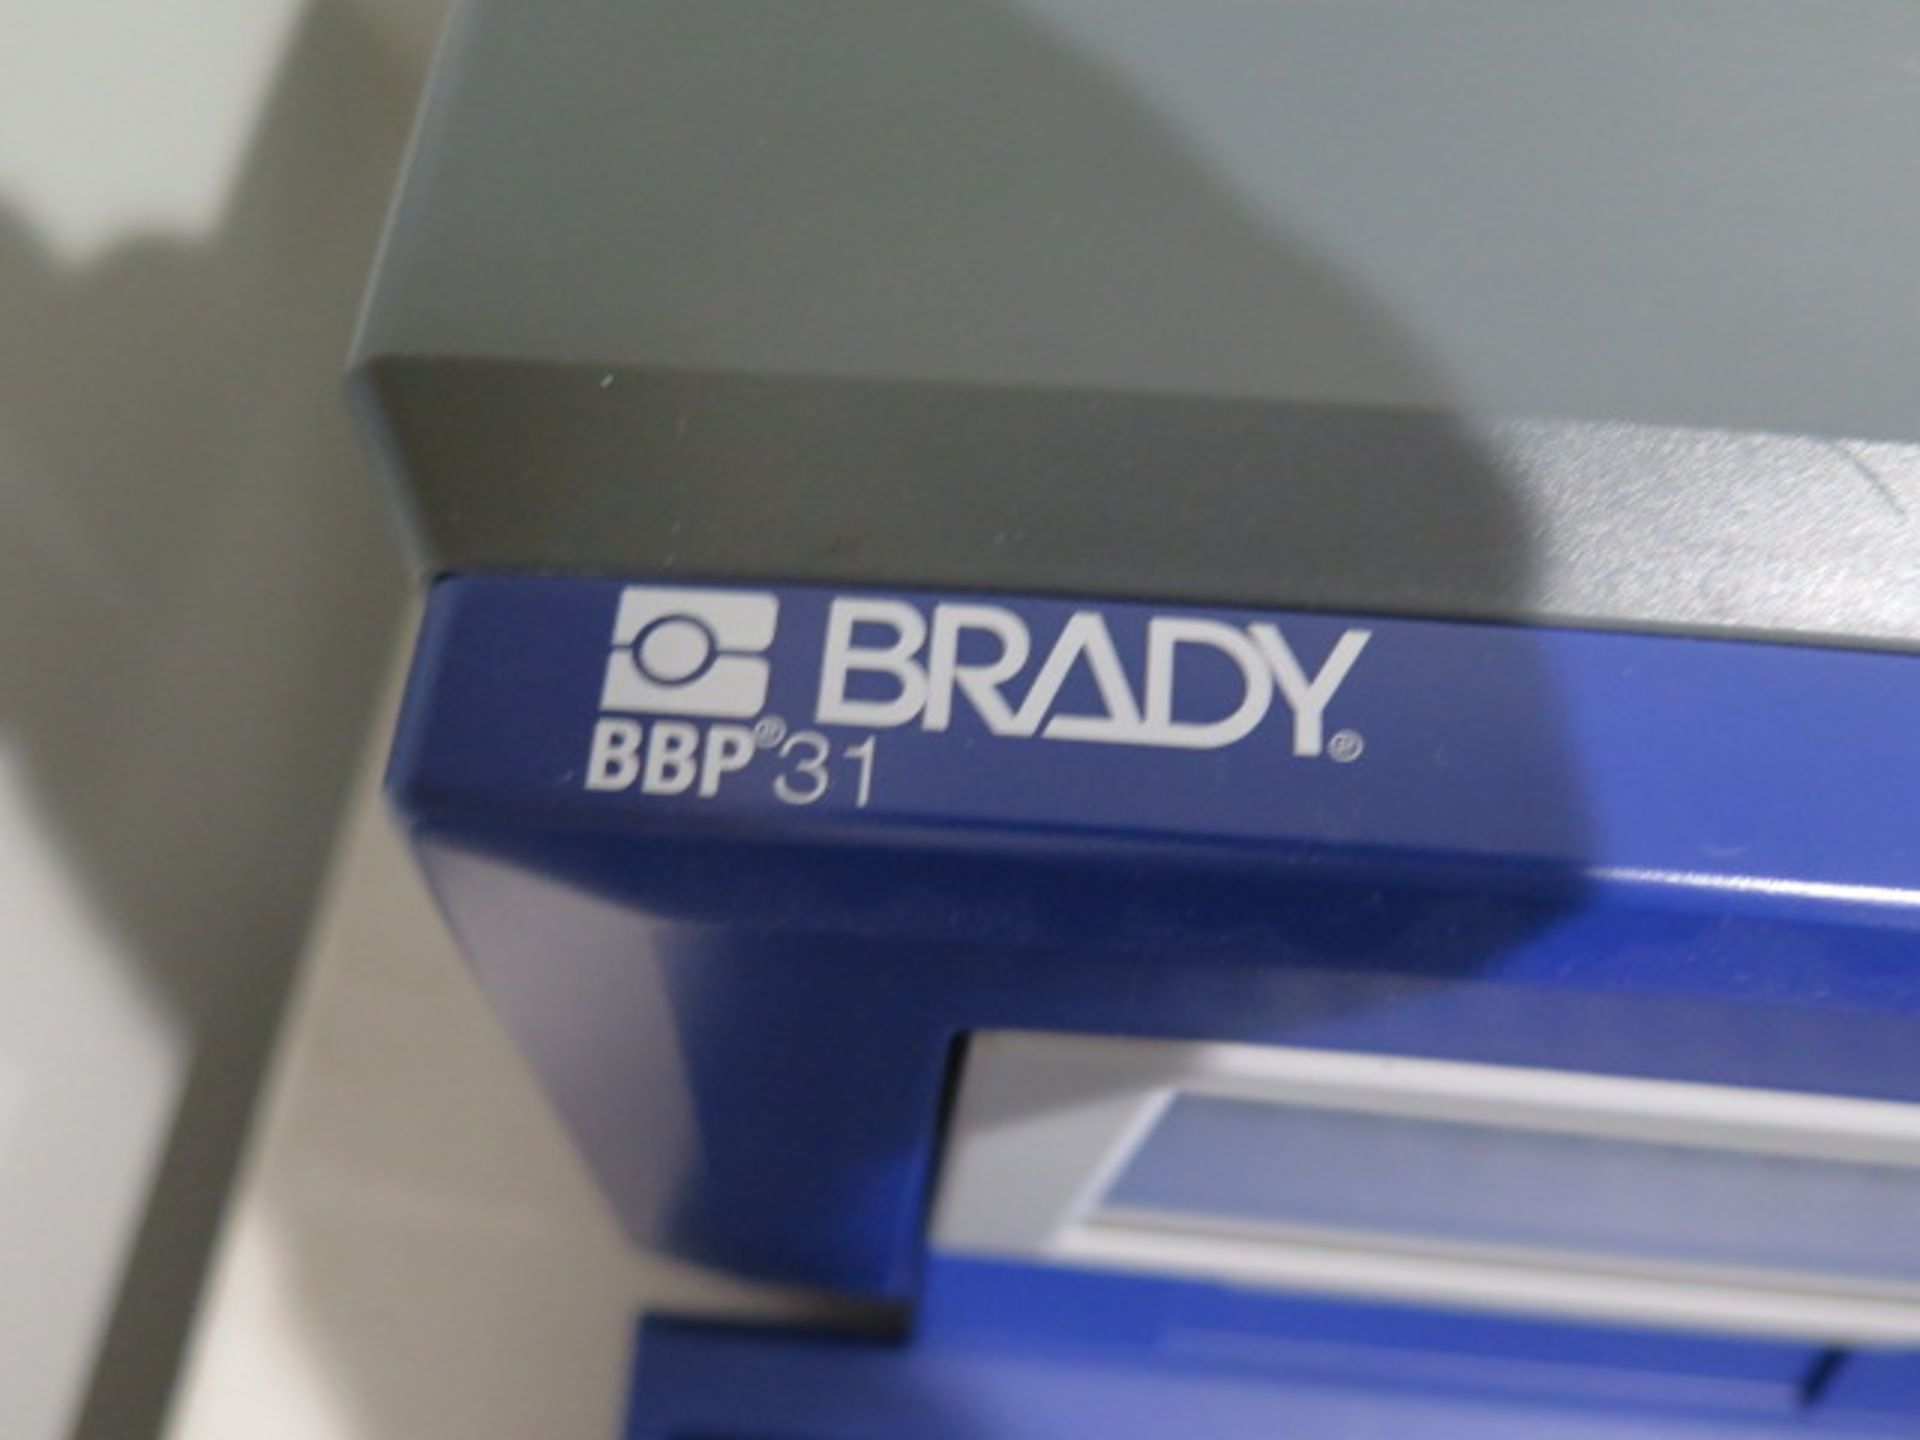 Brady BBP-31 Lable Printer (SOLD AS-IS - NO WARRANTY) - Image 5 of 5